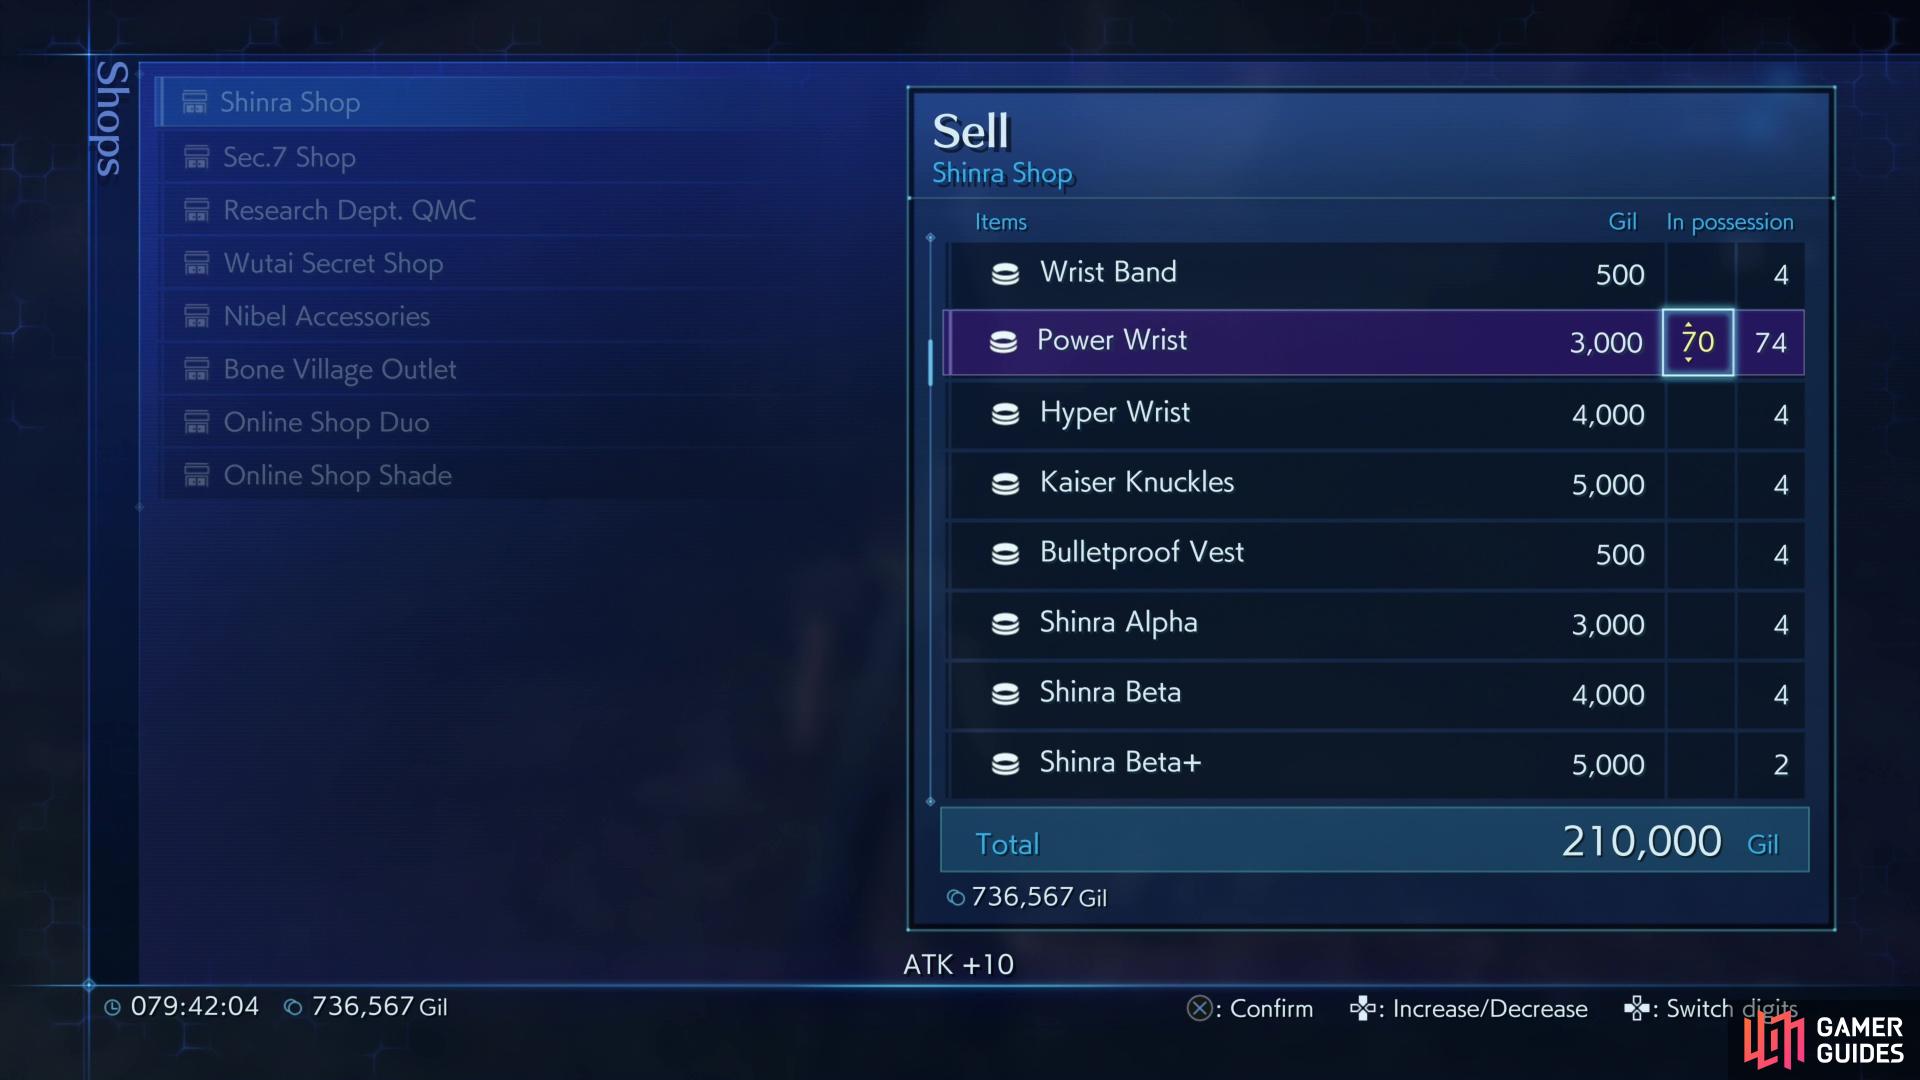 then sell your haul of !Power Wrists for 3,000 Gil a pop - this will earn you roughly 15,000 Gil per fight.